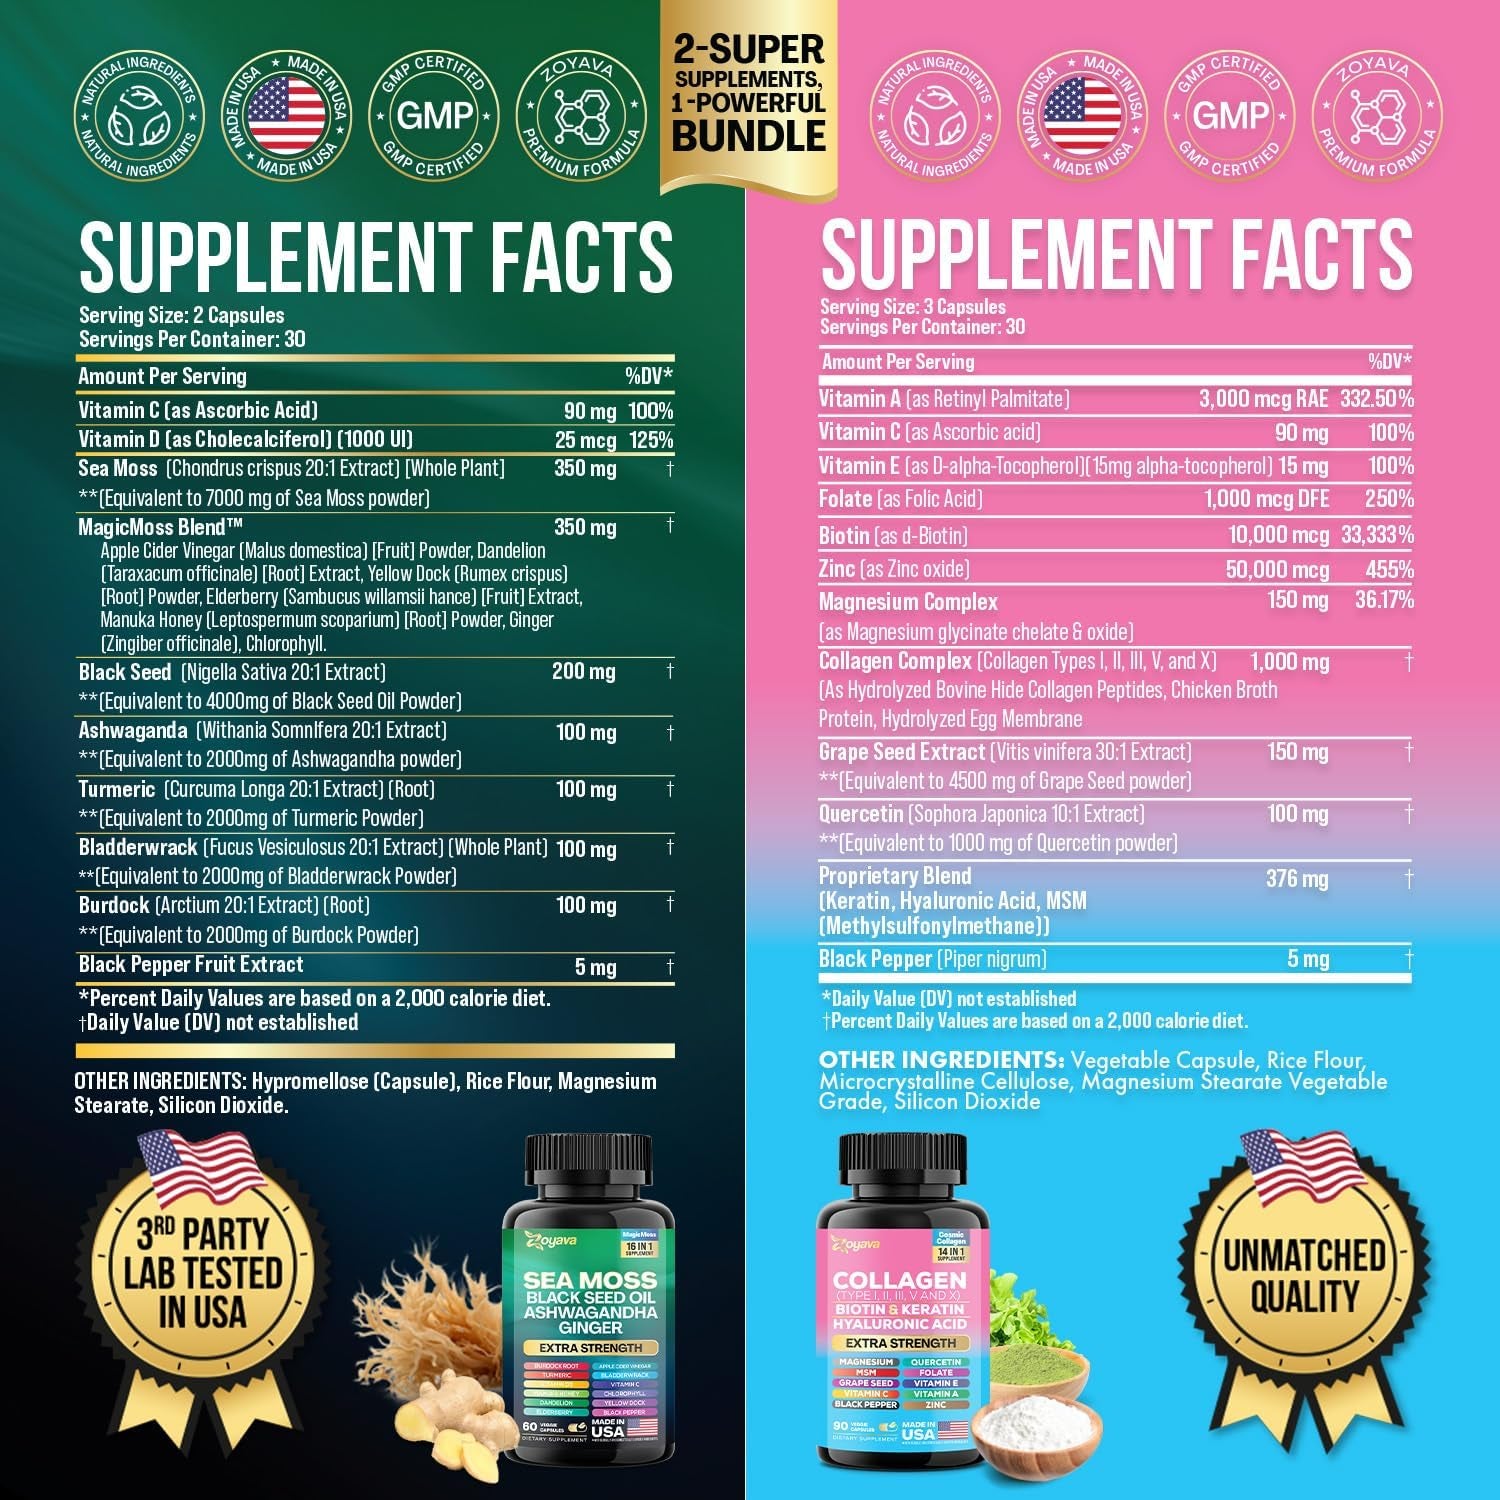 Sea Moss 16-In-1 and Collagen 14-In-1 + Lutein 6-In-1 Supplement Bundle - 30 Day Supply